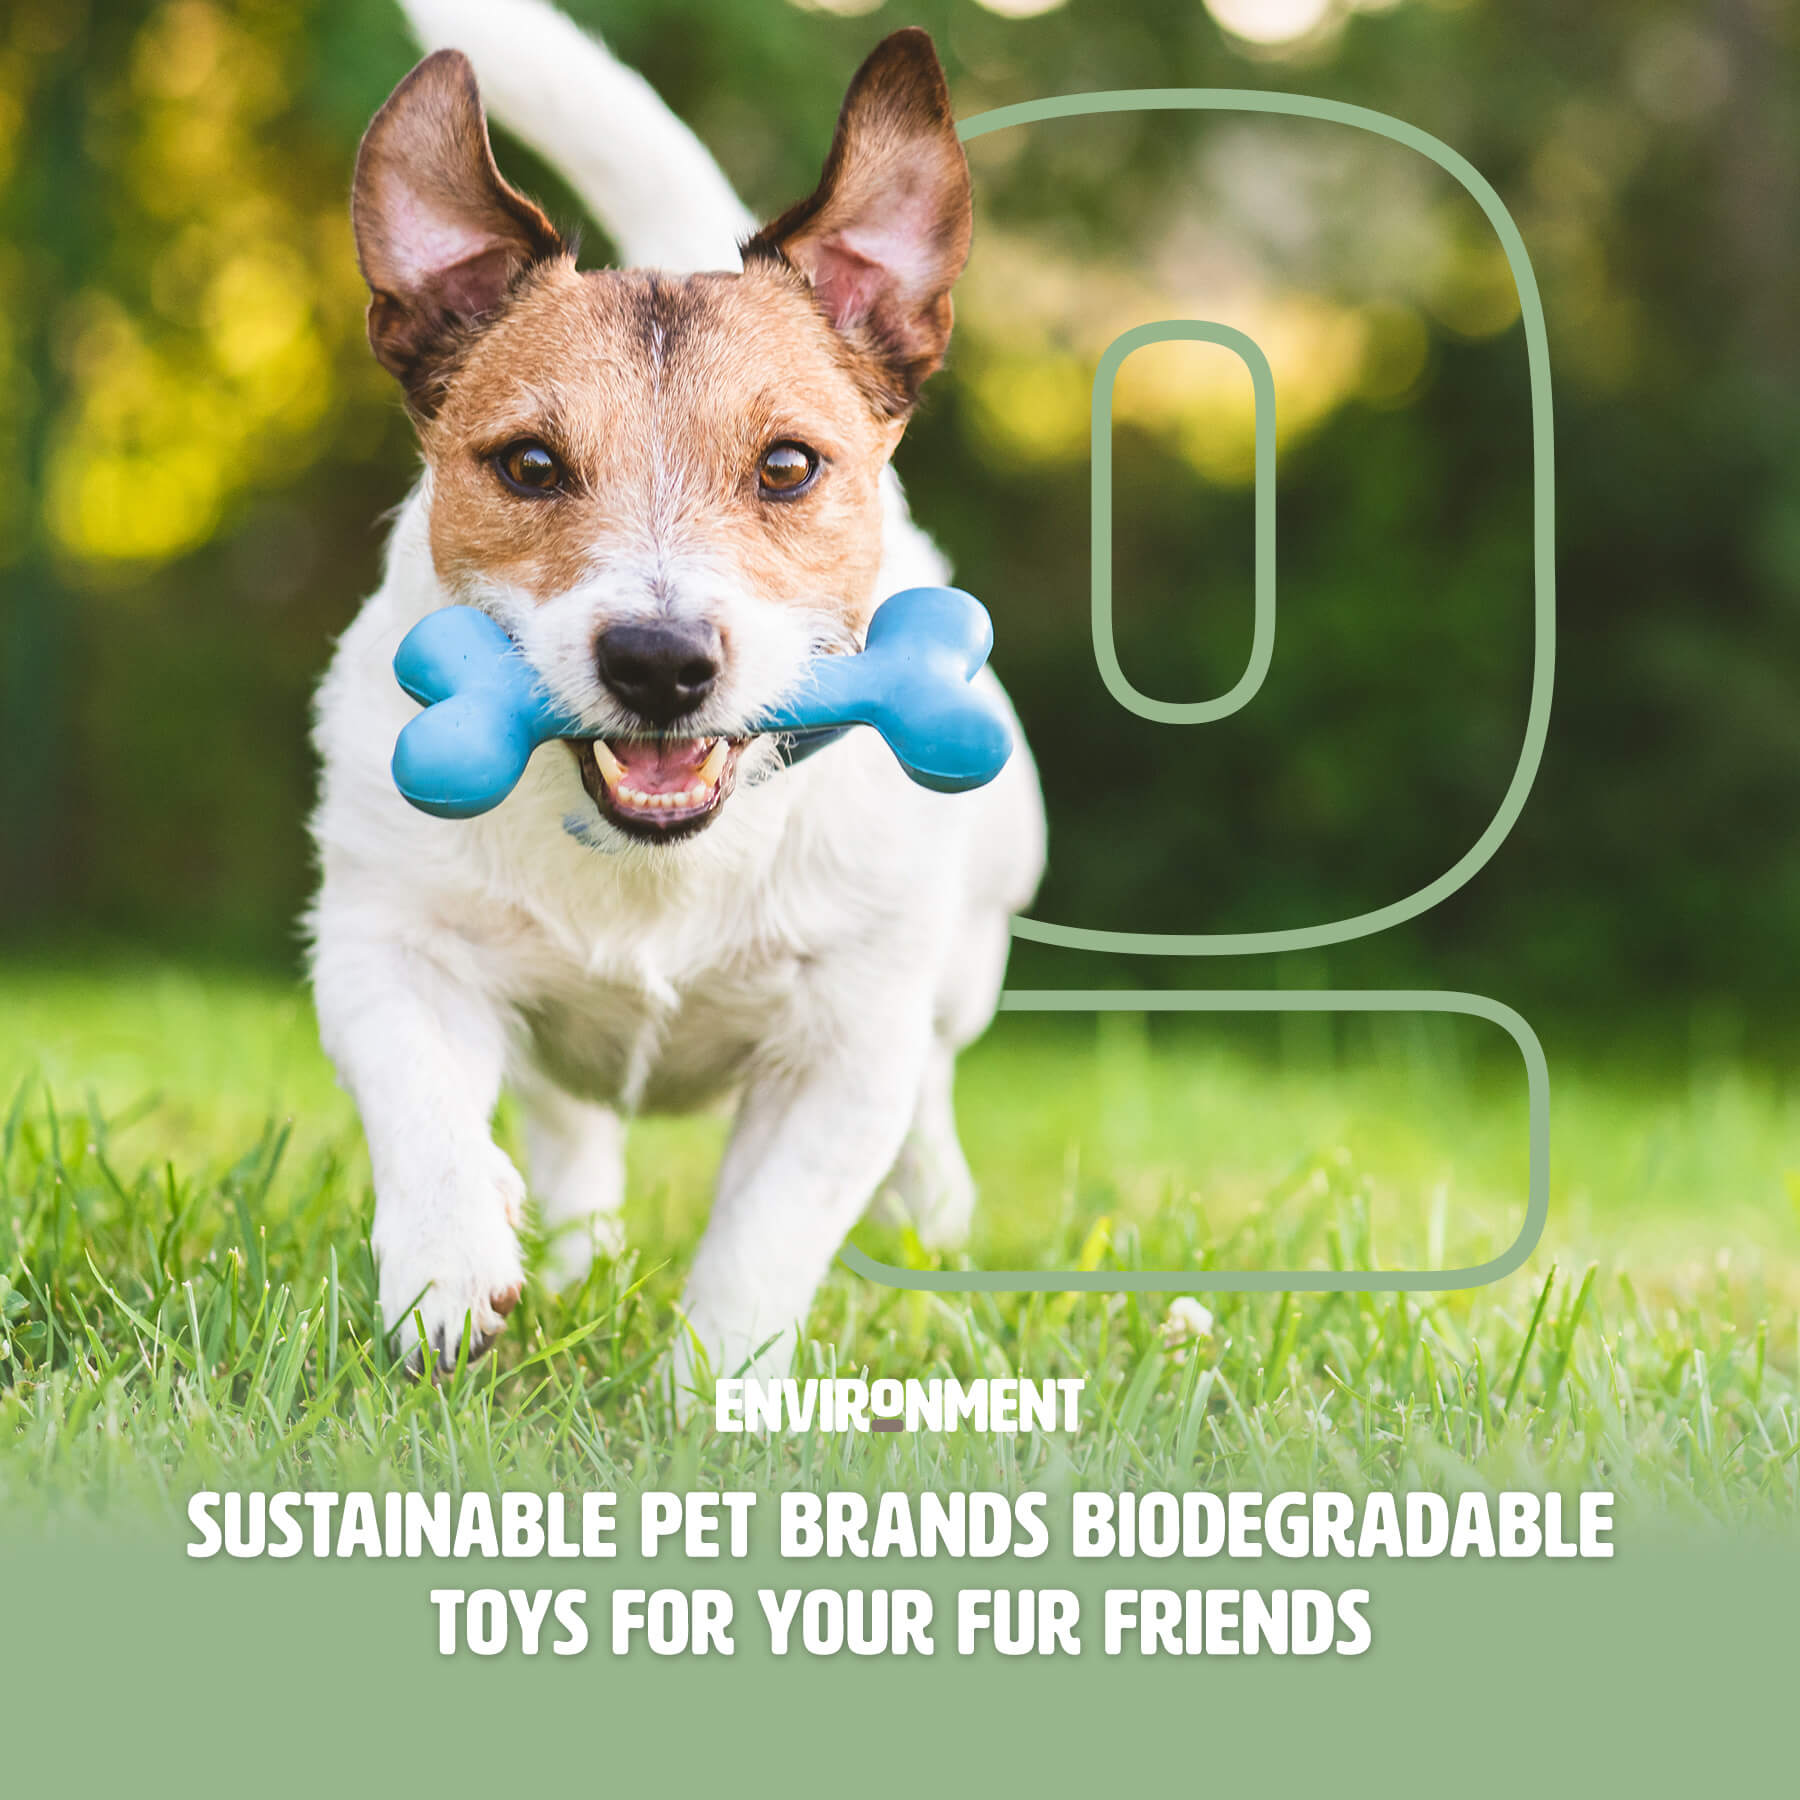 Sustainable Pet Products for Eco-Friendly Pet Care